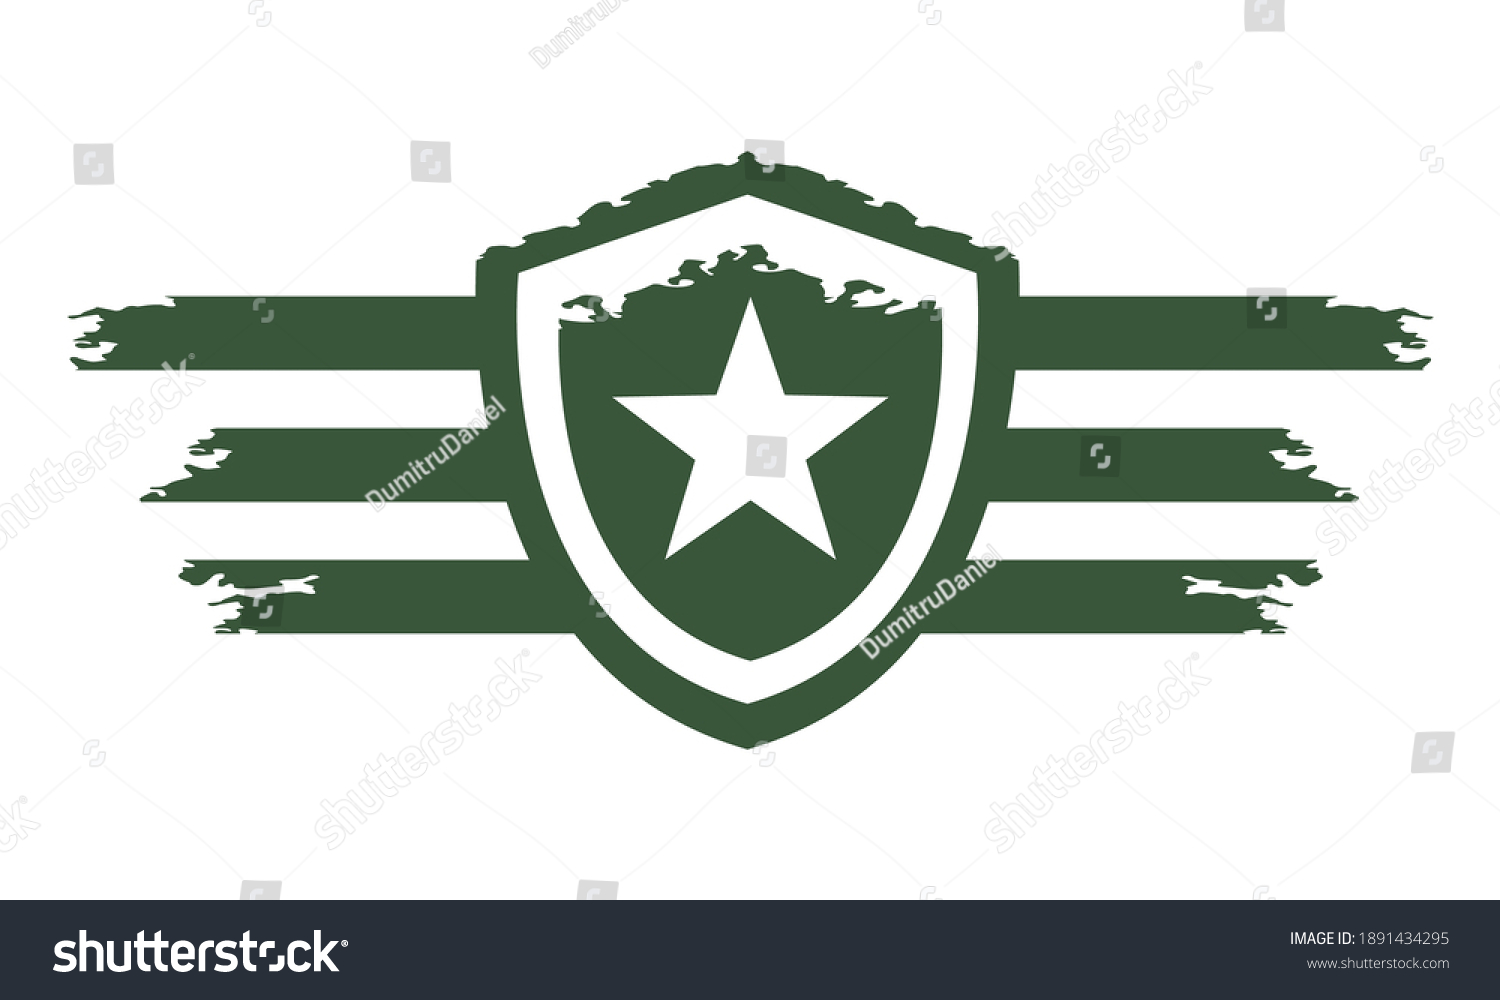 SVG of Air force badge star. Airforce logo with wings and star. Army and military emblem. Vector illustration. svg